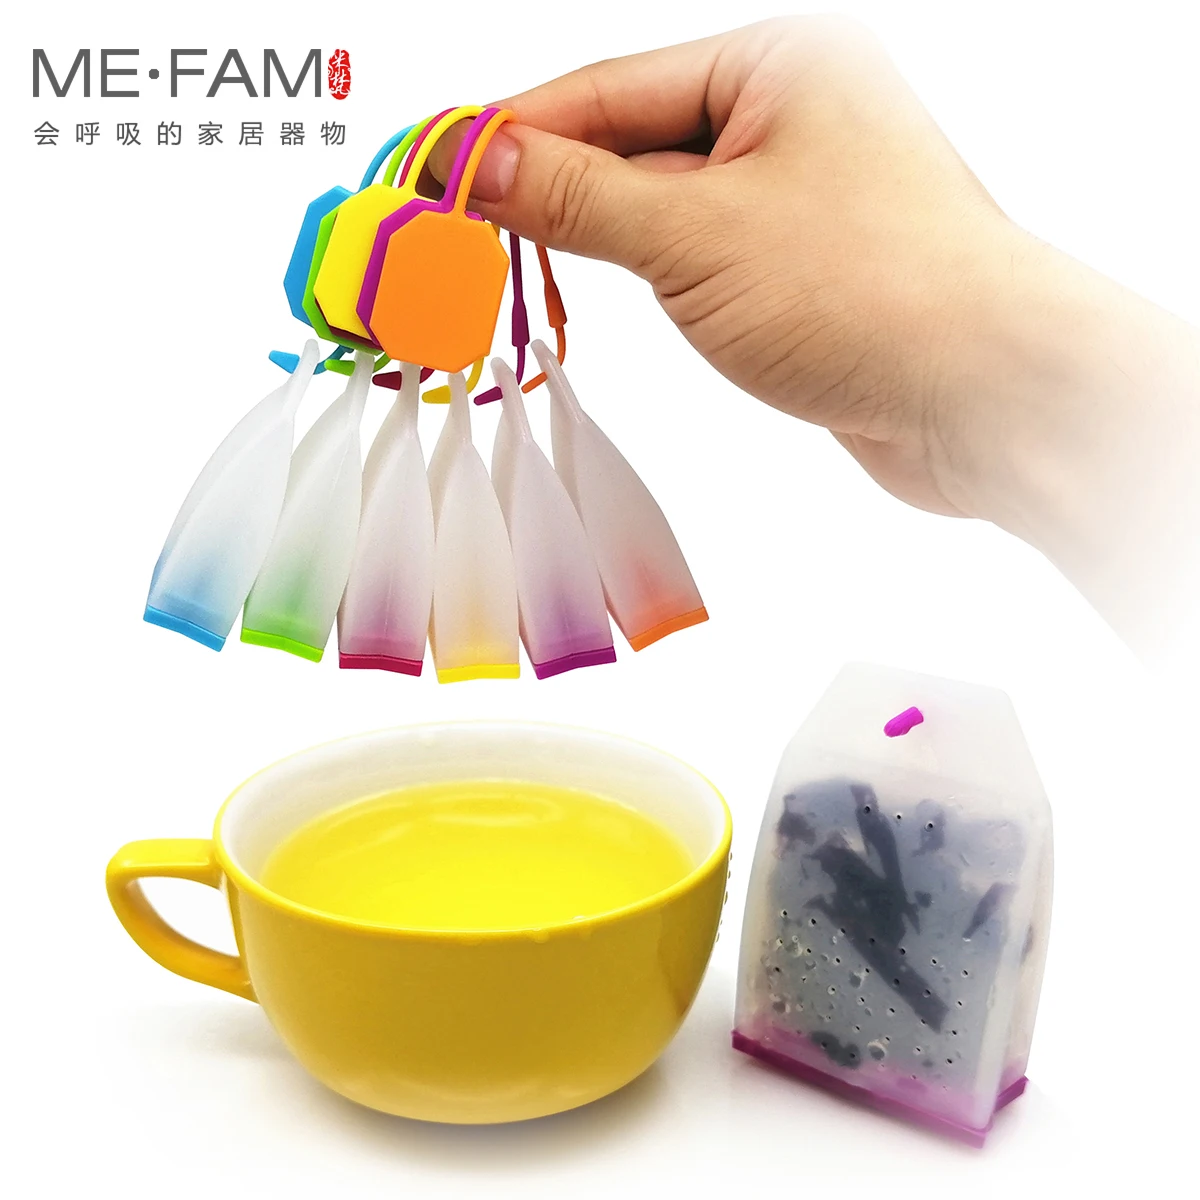 ME.FAM Colorful Jelly Silicone Tea Bag Safe Eco-Friendly Non-toxic Reusable Tea-leaves Infuser Filter Herbal Spice Strainer Tool